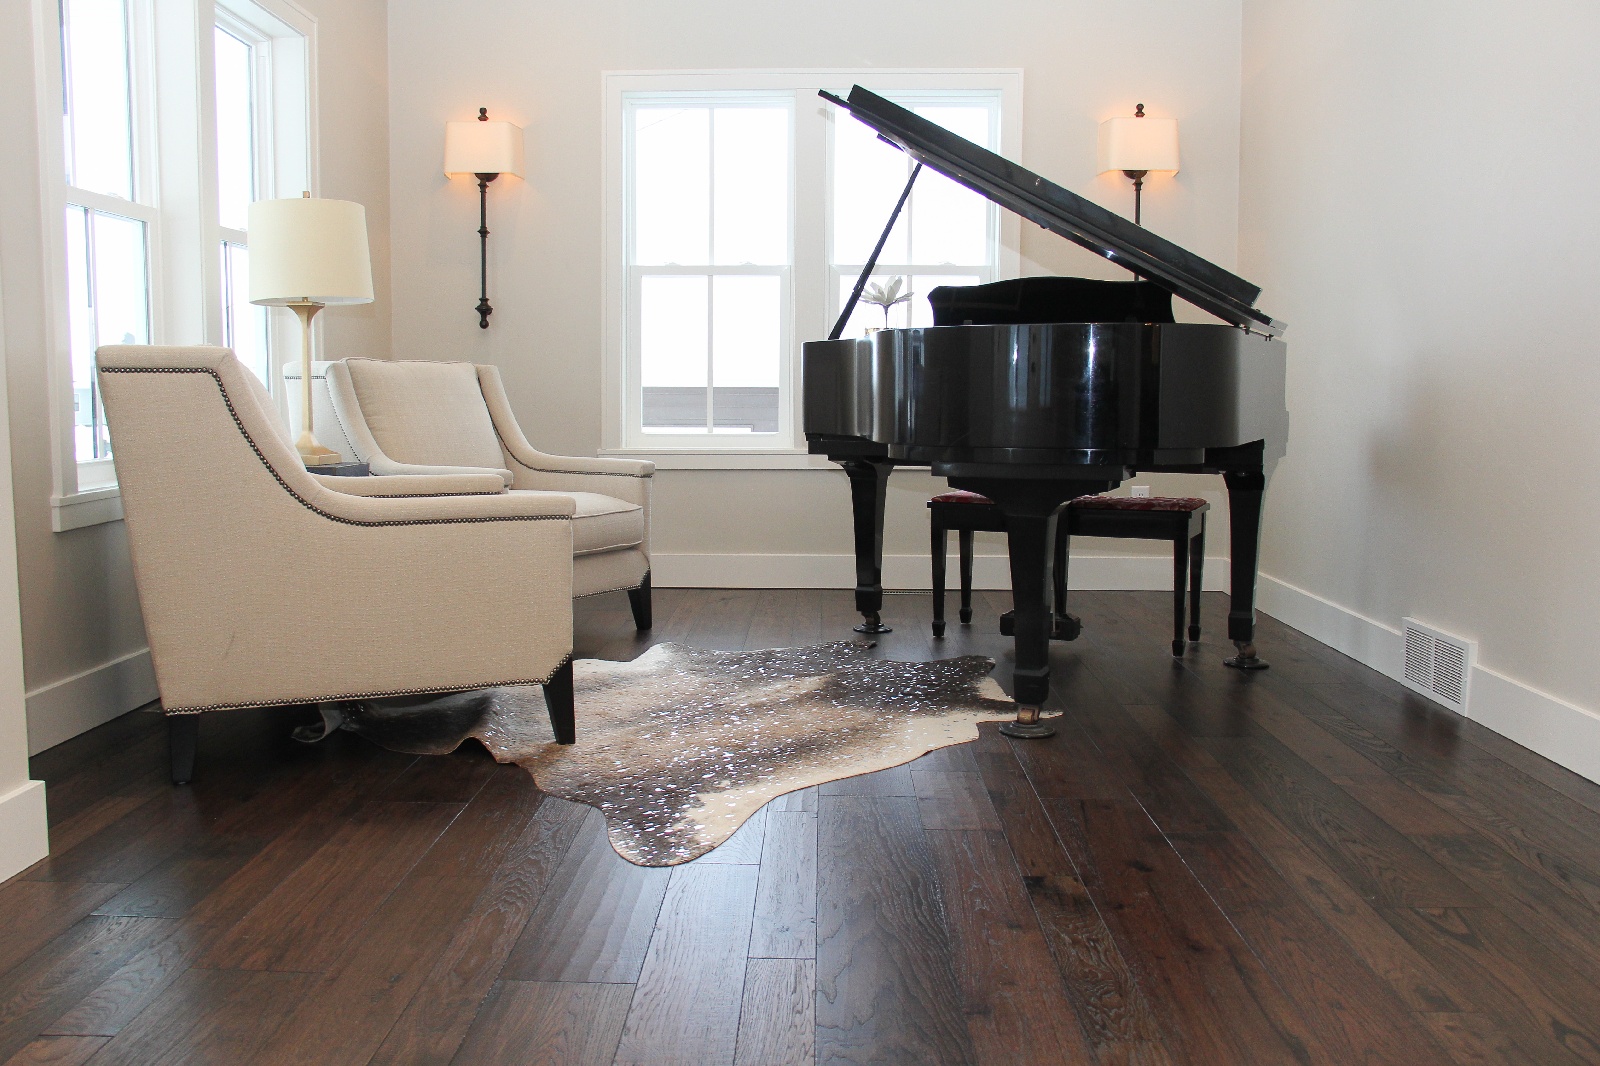 4 Things to Know When Shopping for a Hardwood Floor